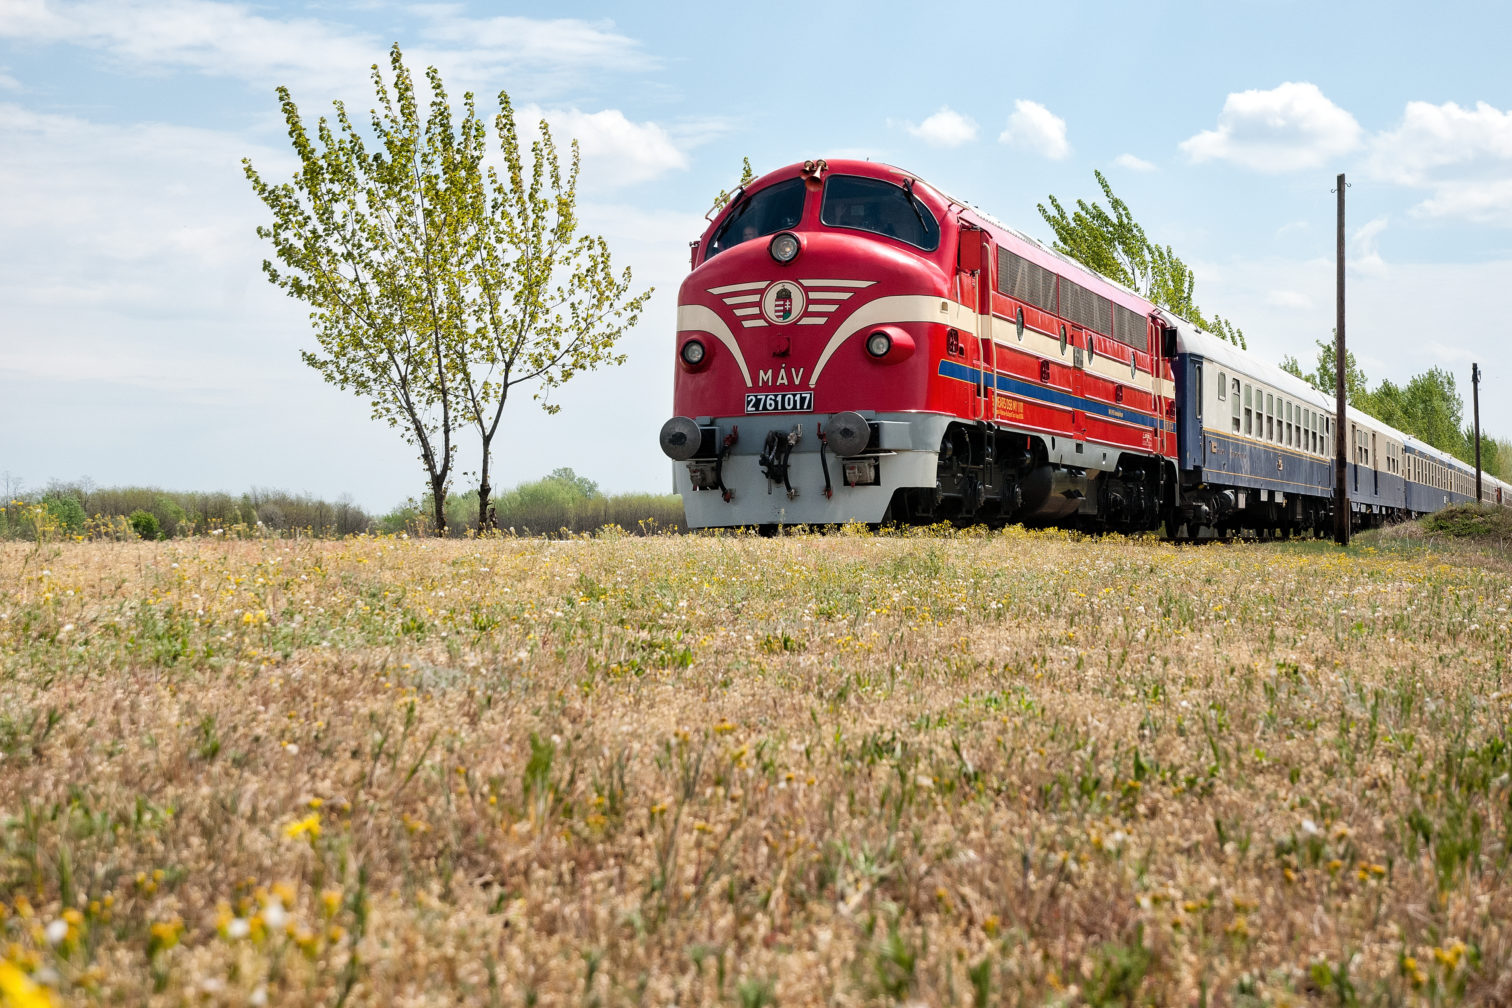 A red train, the Golden Eagle Danube Express, chugs through a rural field in Hungary.